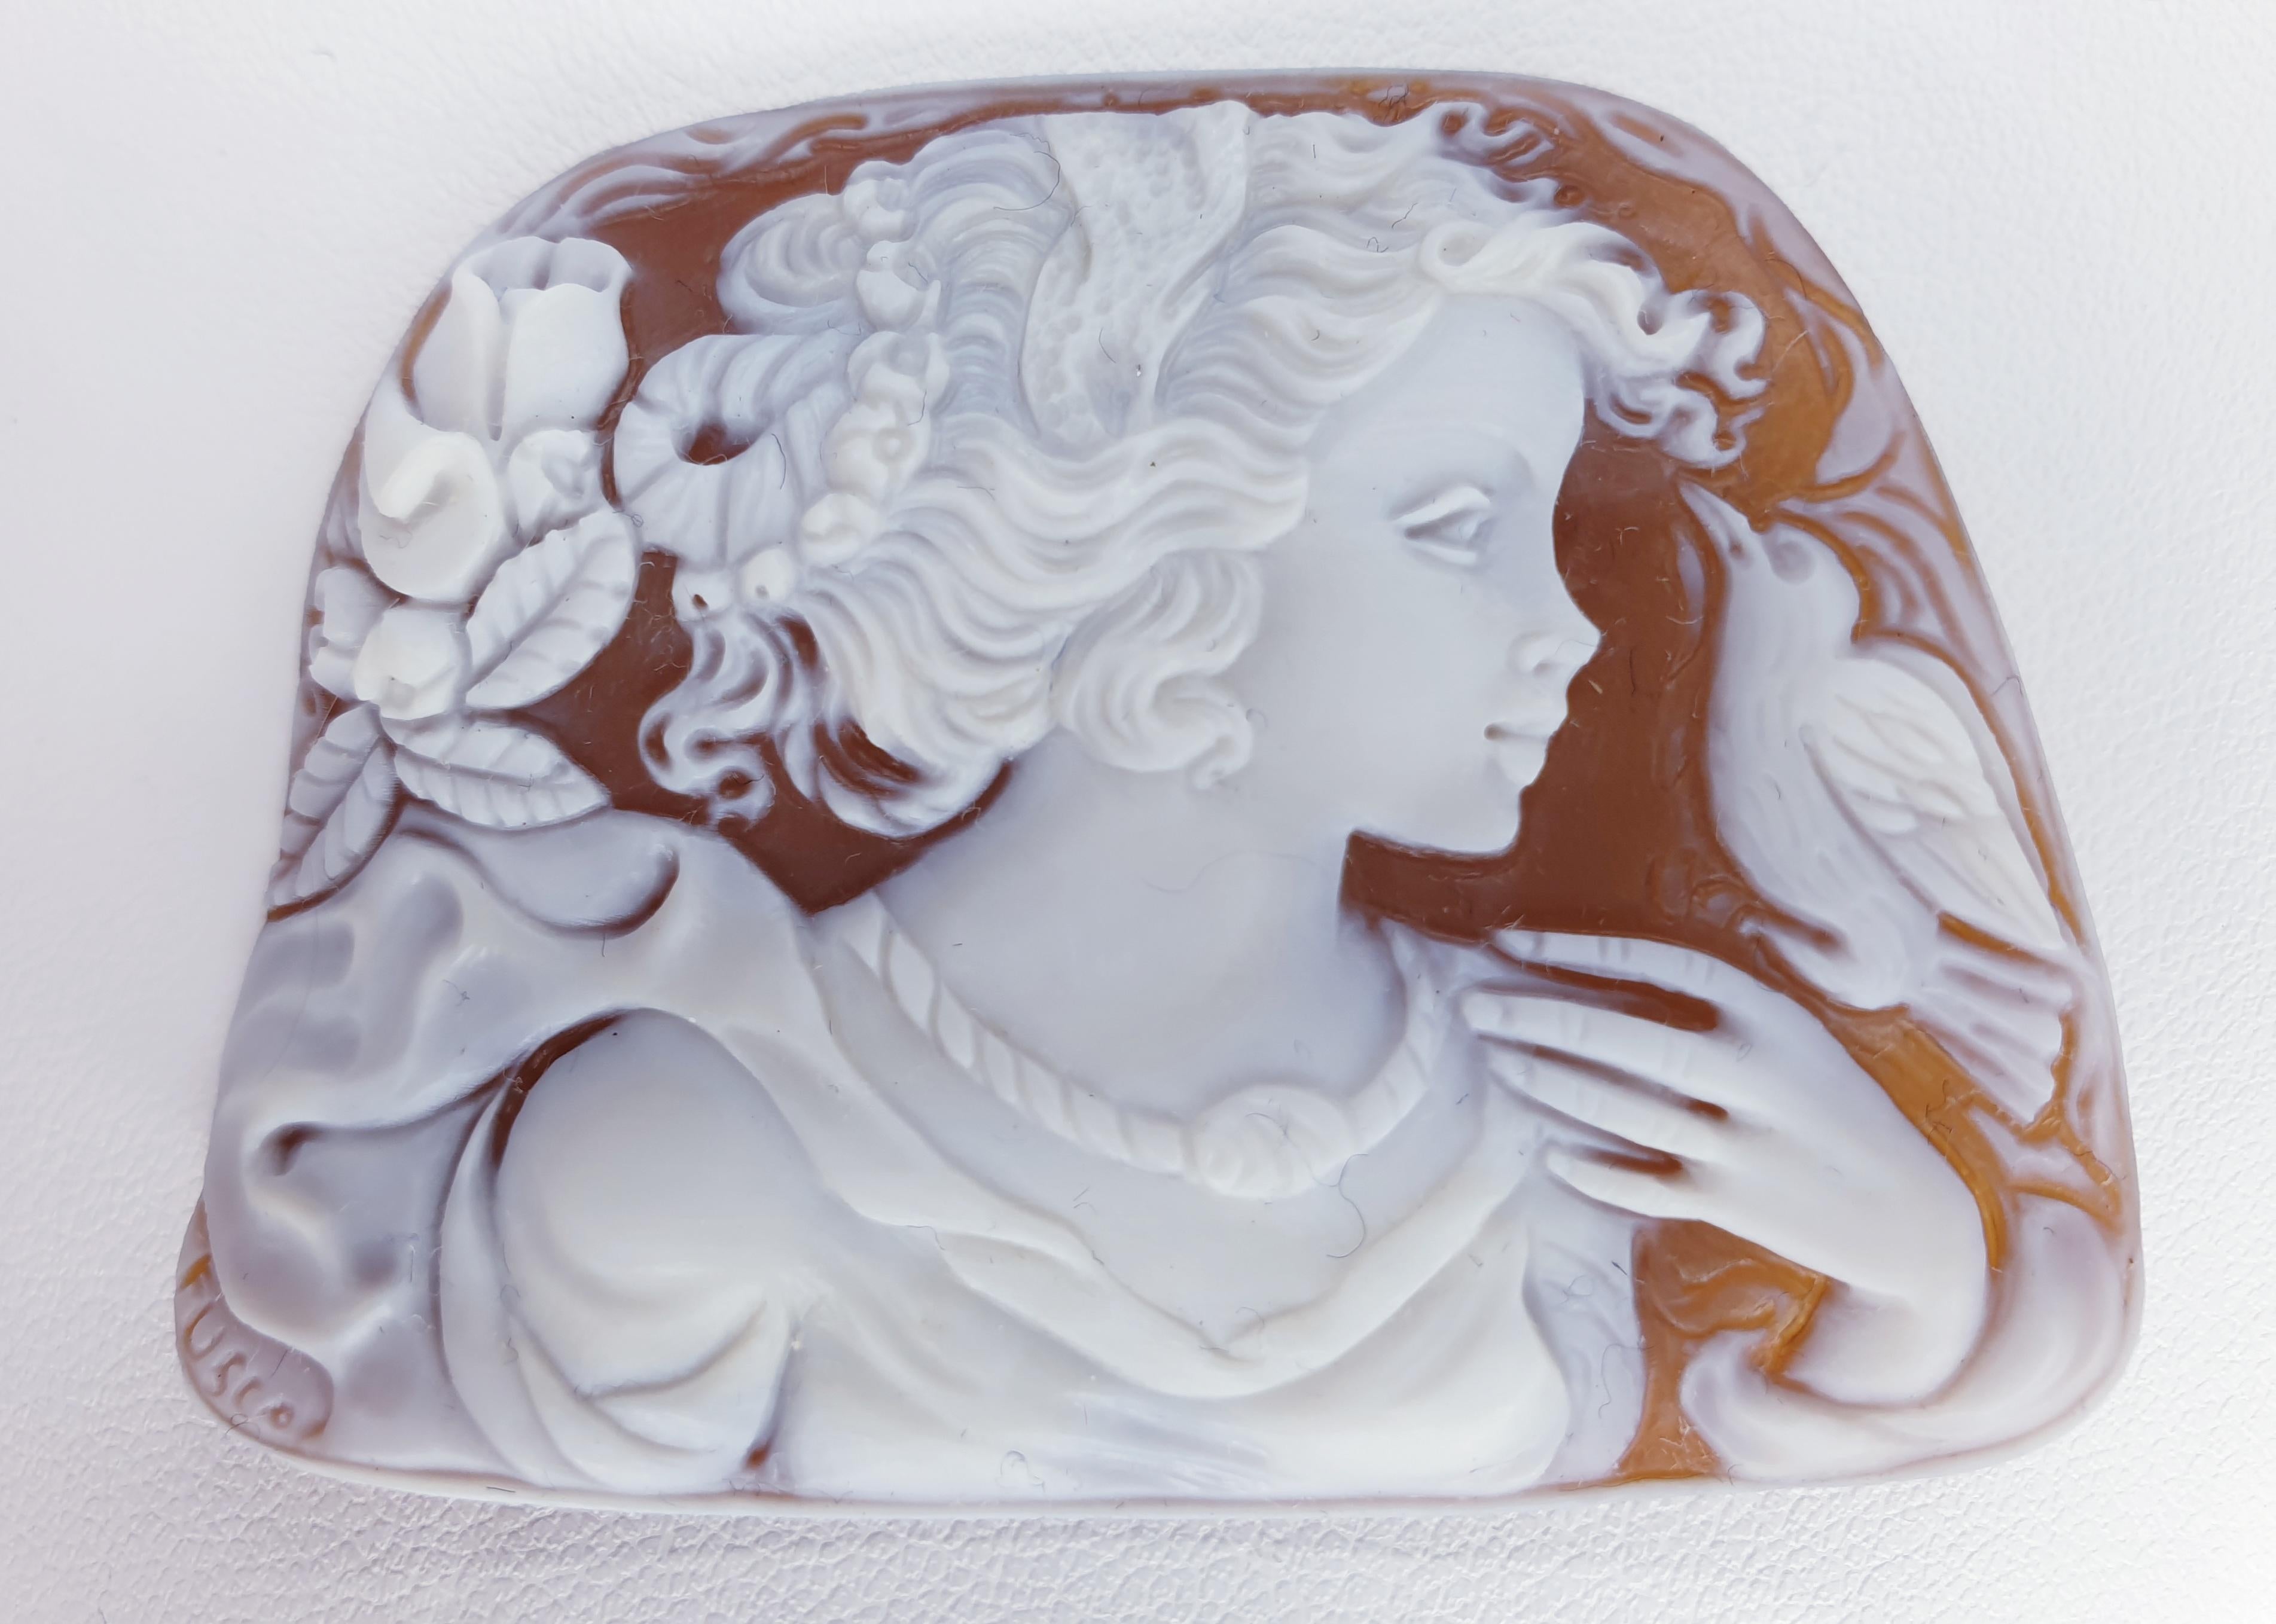 Beautiful Captivating Hand carved shell Cameo depicting the Profile of a Classical Beauty with long flowing hair enhanced with flowers and a Dove. Artist signed: FUSCO. Unmounted. Rendered with remarkable detail and warmth, so unusual to find!